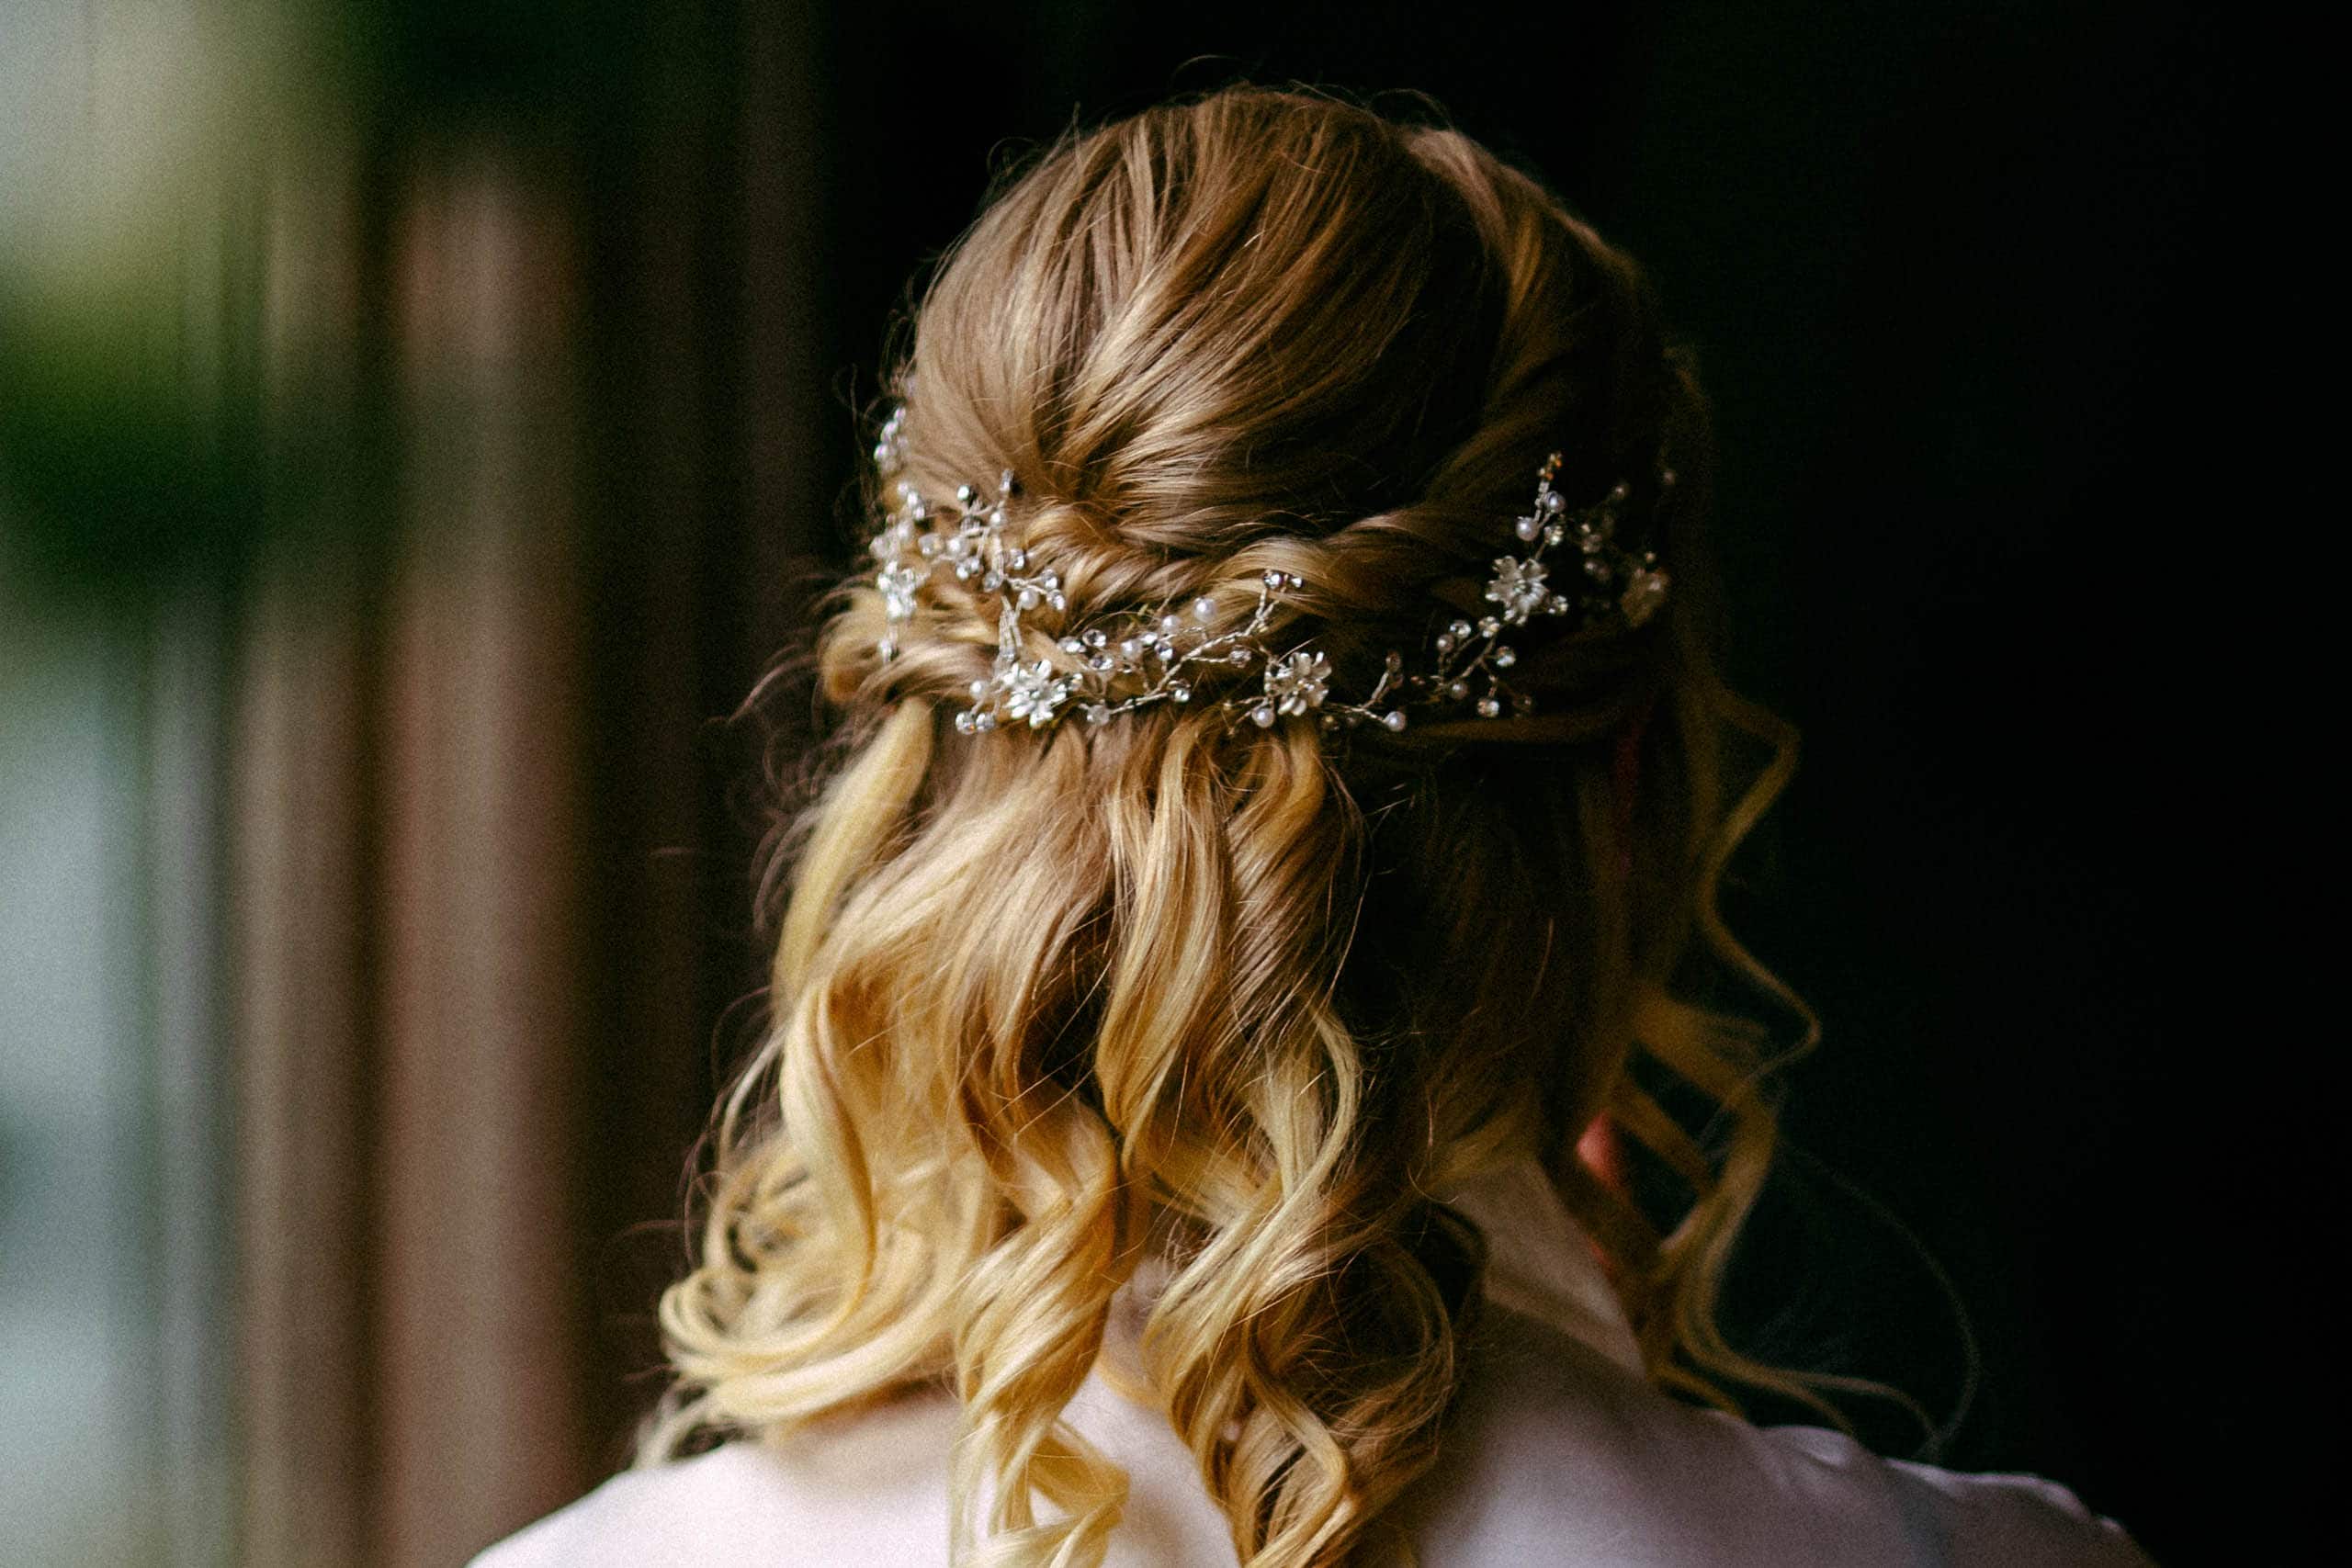 A gorgeous bridal hairstyle with a delicate floral accent.